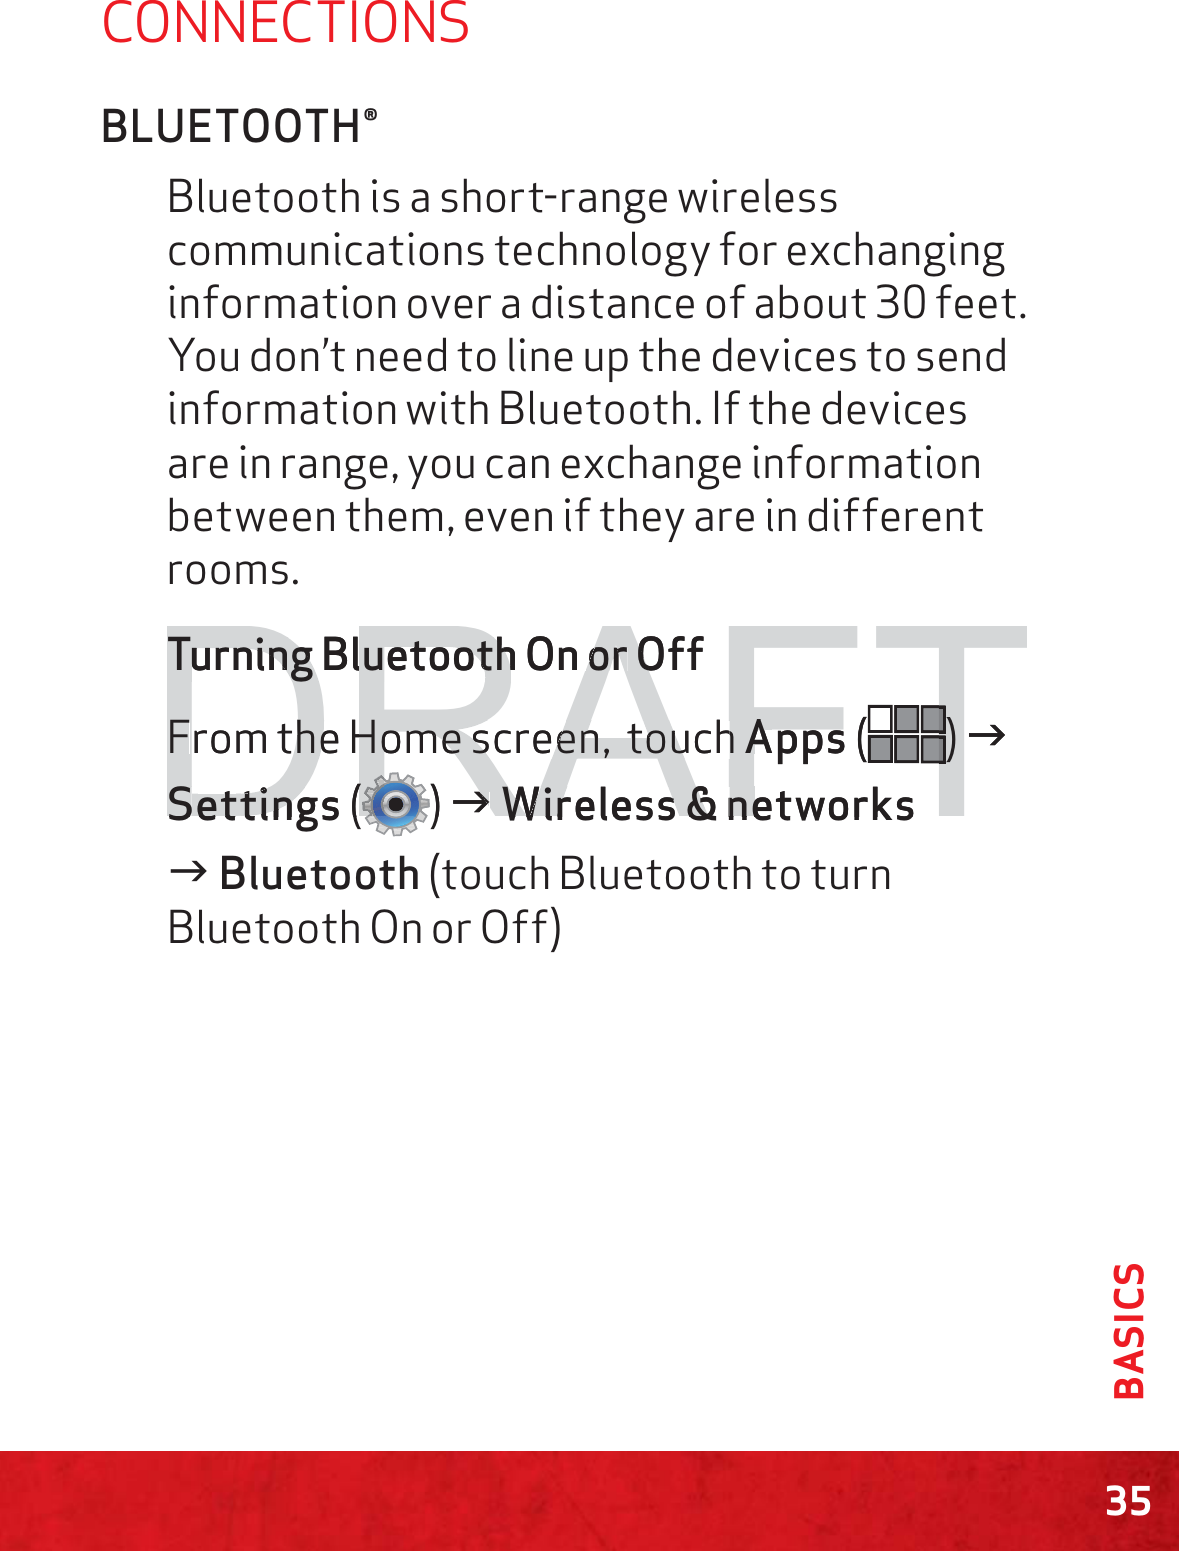 35BASICSCONNECTIONSBLUETOOTH®Bluetooth is a short-range wireless communications technology for exchanging information over a distance of about 30 feet. You don’t need to line up the devices to send information with Bluetooth. If the devices are in range, you can exchange information between them, even if they are in different rooms.Turning Bluetooth On or Off From the Home screen,  touch Apps () J Settings () J Wireless &amp; networksJ Bluetooth (touch Bluetooth to turn Bluetooth On or Off)DRAFTTurning BluetoothTurning BluetoothOn or or OOff FFrom the Home screen,  touch he Home screen,  touch AApps(TTTTTTTTTTTT) ) JSSetettingsting((RRRRRRRRRRRRRRRRRRRRRRRRRRRRRRRRRRRRRRRRRRRRRRRRRRRRRRRRRRRRRRRRRRRRRRRRRRRRRRRRRRRRRRRRRRRRRRRRRRRRRRRRRRRRRRRRRRRRRRRRRRRRRRRRRRRRRRRRRRRRRRRRRRRRRRRRRRRRRRRRRRRRRRRRRRRRRRRRRRRRRRRRRRRRRRRRRRRRRRRRRRRRRRRRRRRRRRRRRRRRRRRRRRRRRRRRRRRRRRRRRRRRRRRRRRRRRRRRRRRRRRRRRRRRRRRRRRRRRRRRRRRRRRRRRRRRRRRRRRRRRRRRRRRRRRRRRRRRRRRRRRRRRRRRRRRRRRRRRRRRRRR)JJWireless&amp;networksWireless&amp;ne